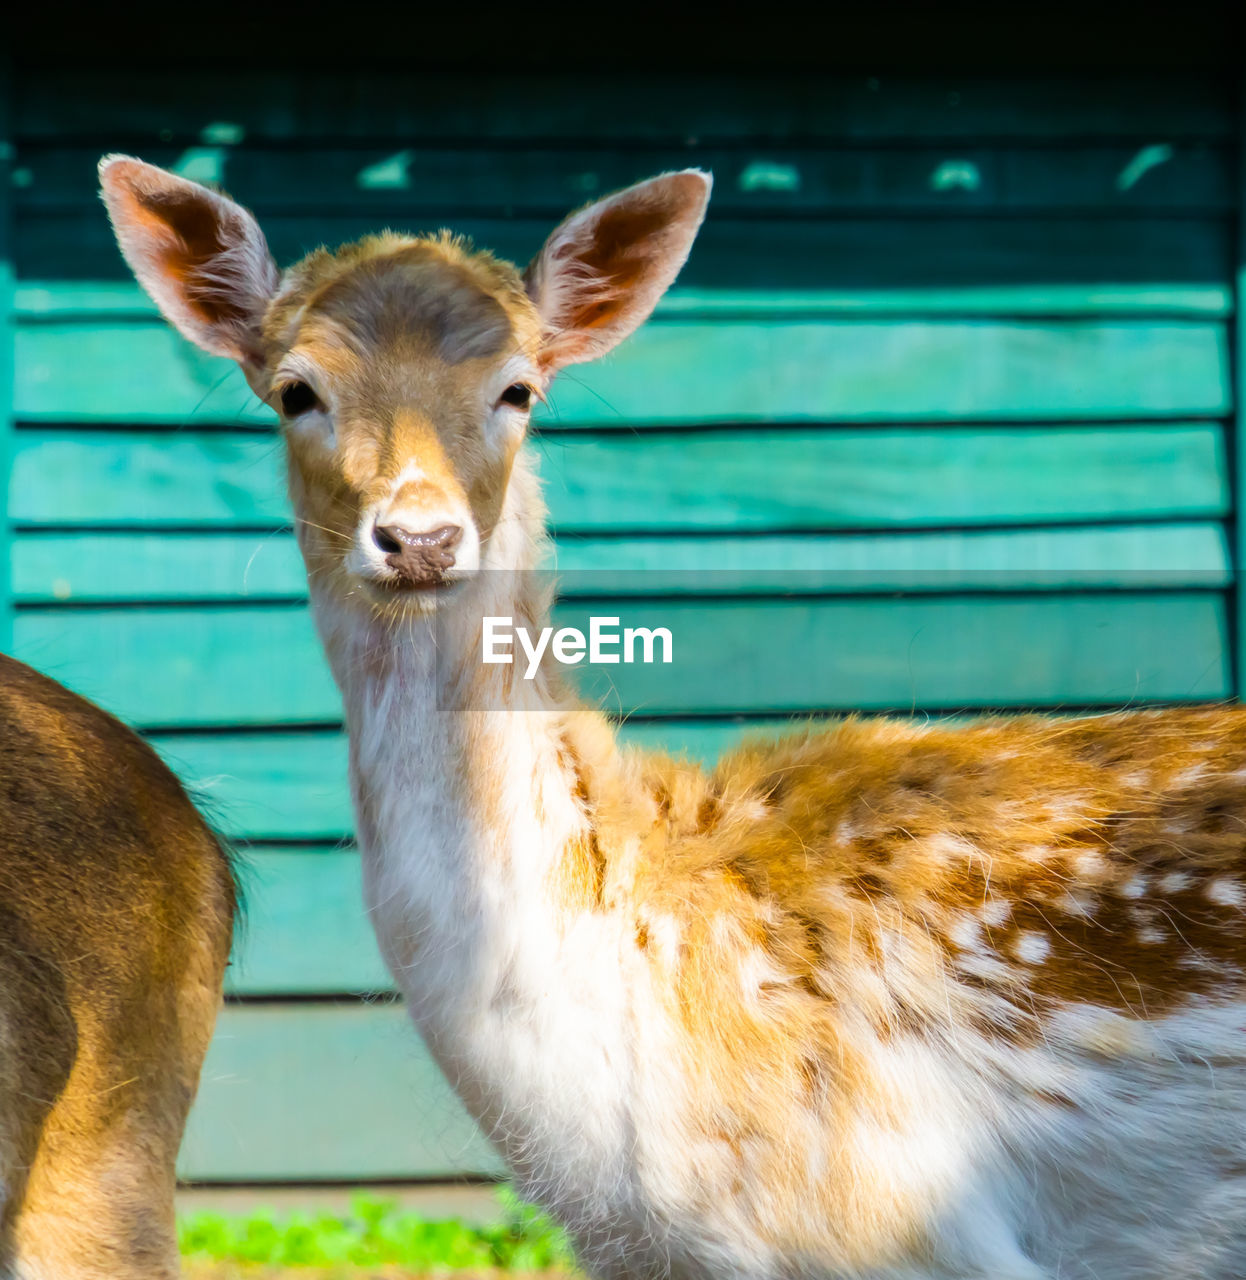 animal themes, animal, mammal, domestic animals, portrait, animal wildlife, livestock, one animal, looking at camera, wildlife, no people, nature, pet, deer, animal body part, standing, agriculture, day, close-up, outdoors, brown, focus on foreground, farm, herbivorous, animal head